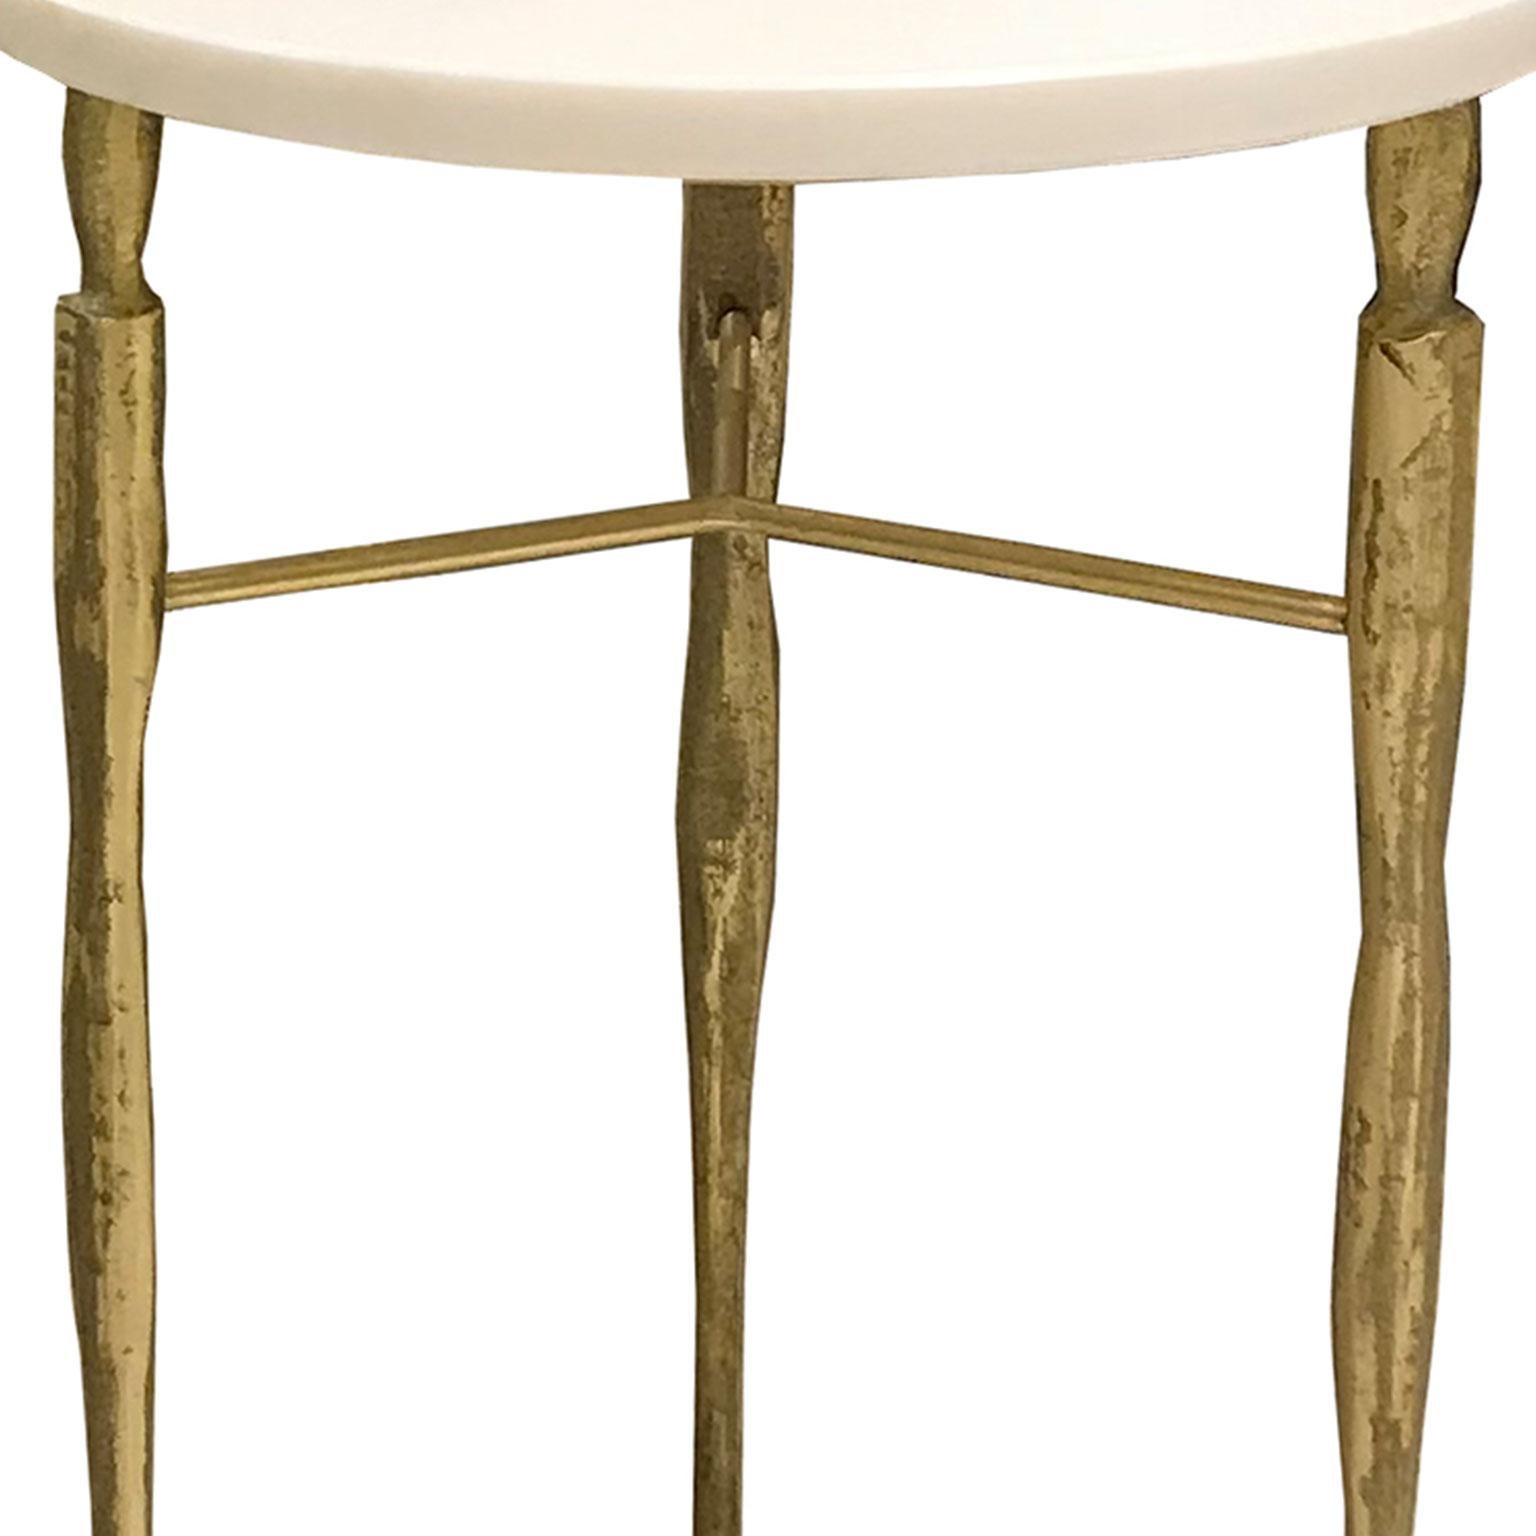 Bespoke side table Ellie in a modern design with a Giacometti inspired base in hand hammered metal with a gold finish. The round top is available in white or black marble, granite, wood or glass. 
Custom designed piece, made to order. 
Sizes: 14